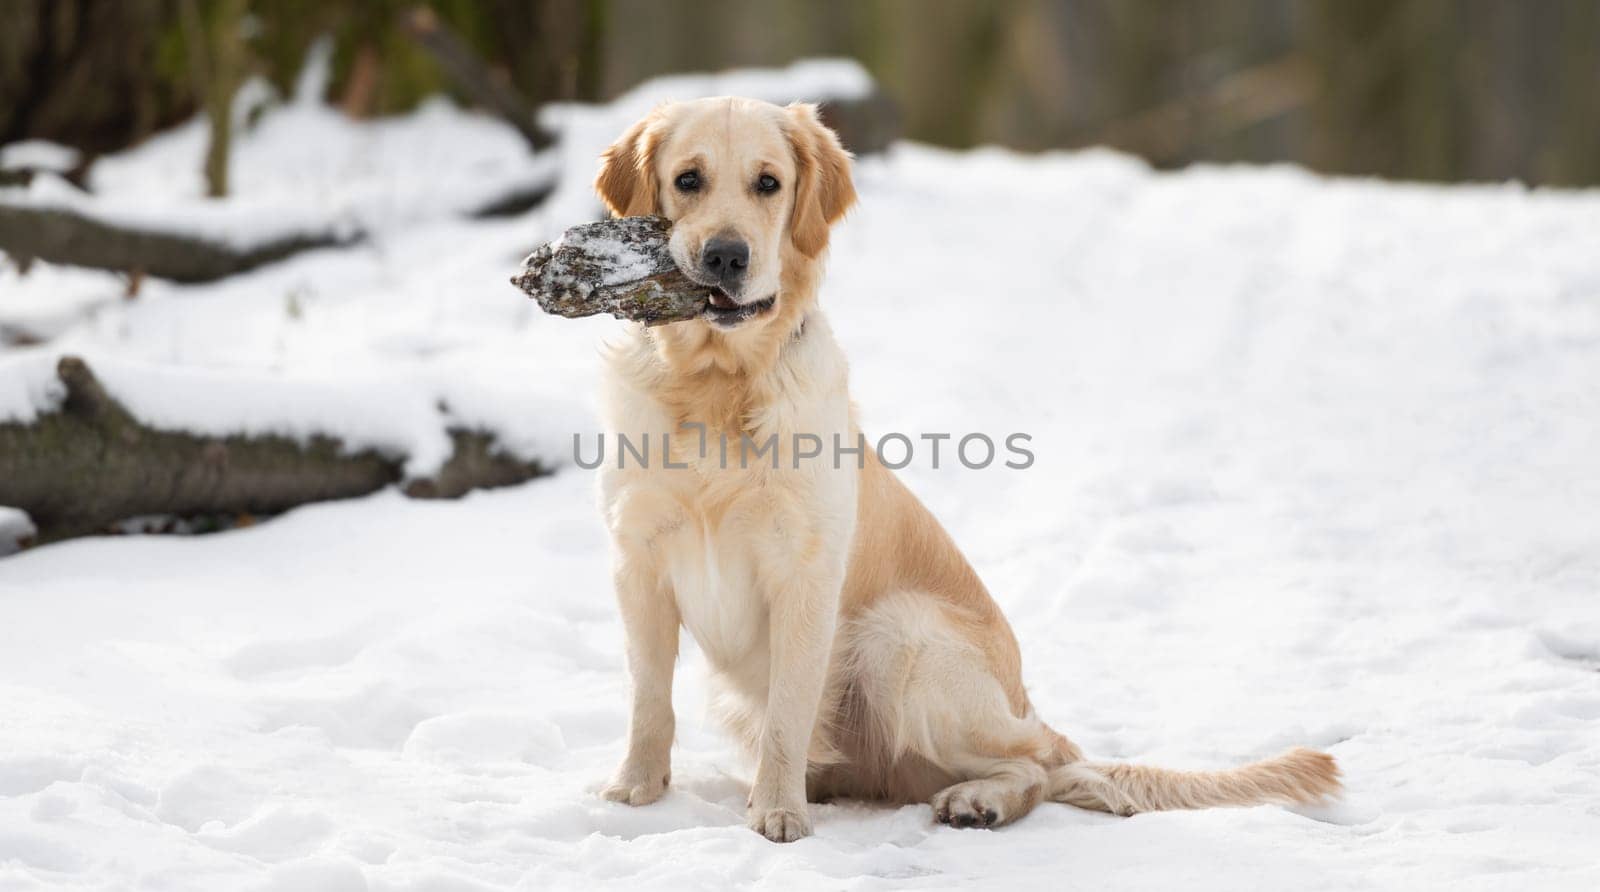 Golden retriever dogsitting on the snow and holding forest snag in its teeth during winter walk